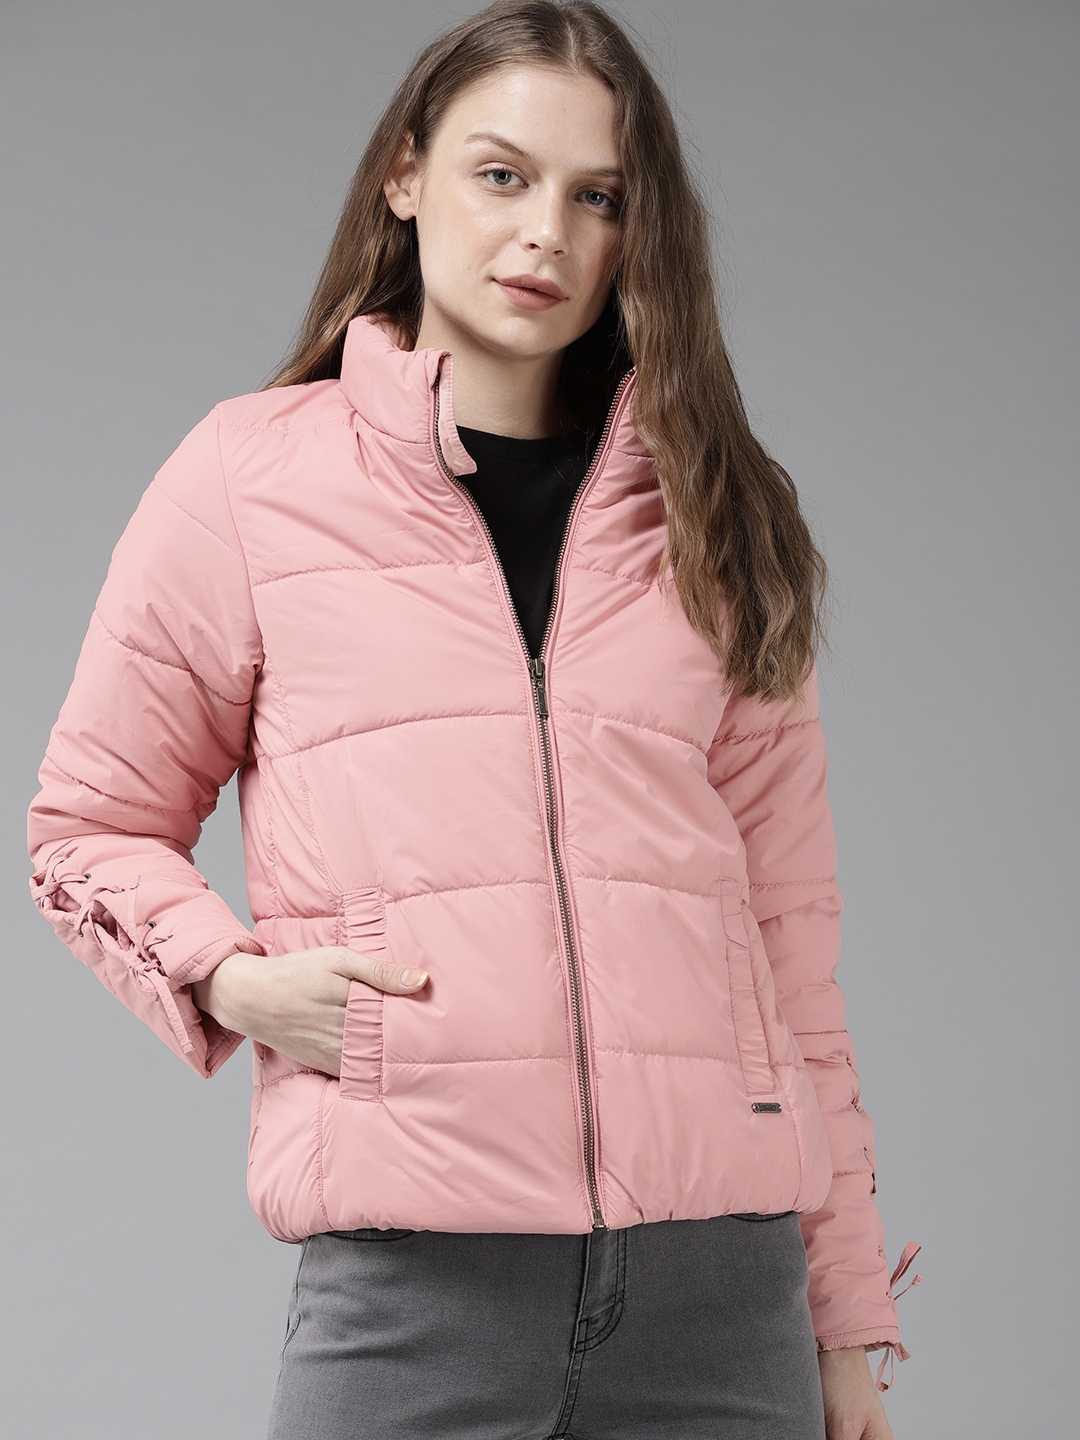 Discover more than 147 pink jacket women best